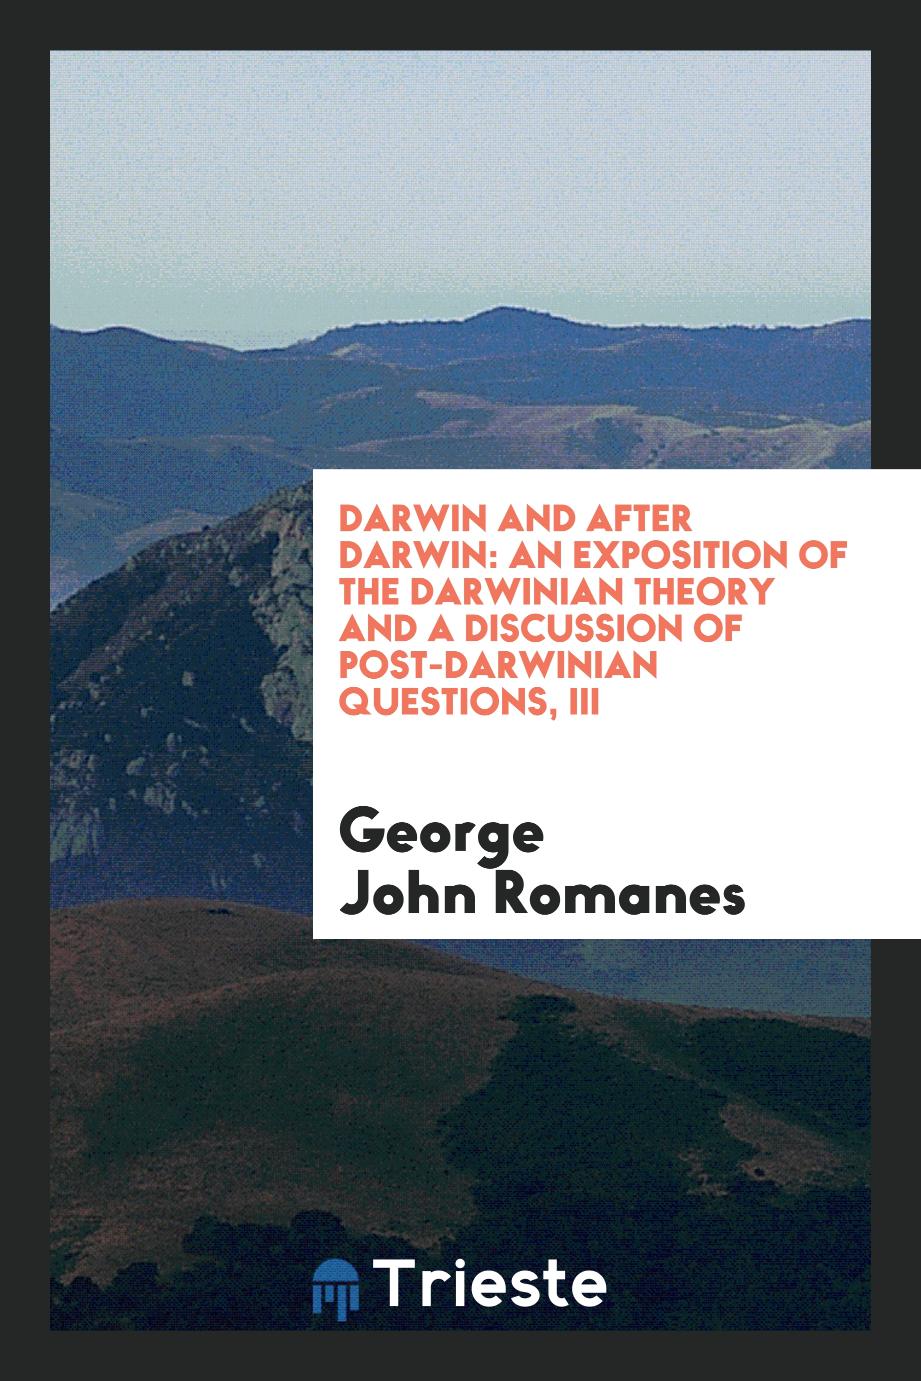 Darwin and after Darwin: an exposition of the Darwinian theory and a discussion of post-Darwinian questions, III